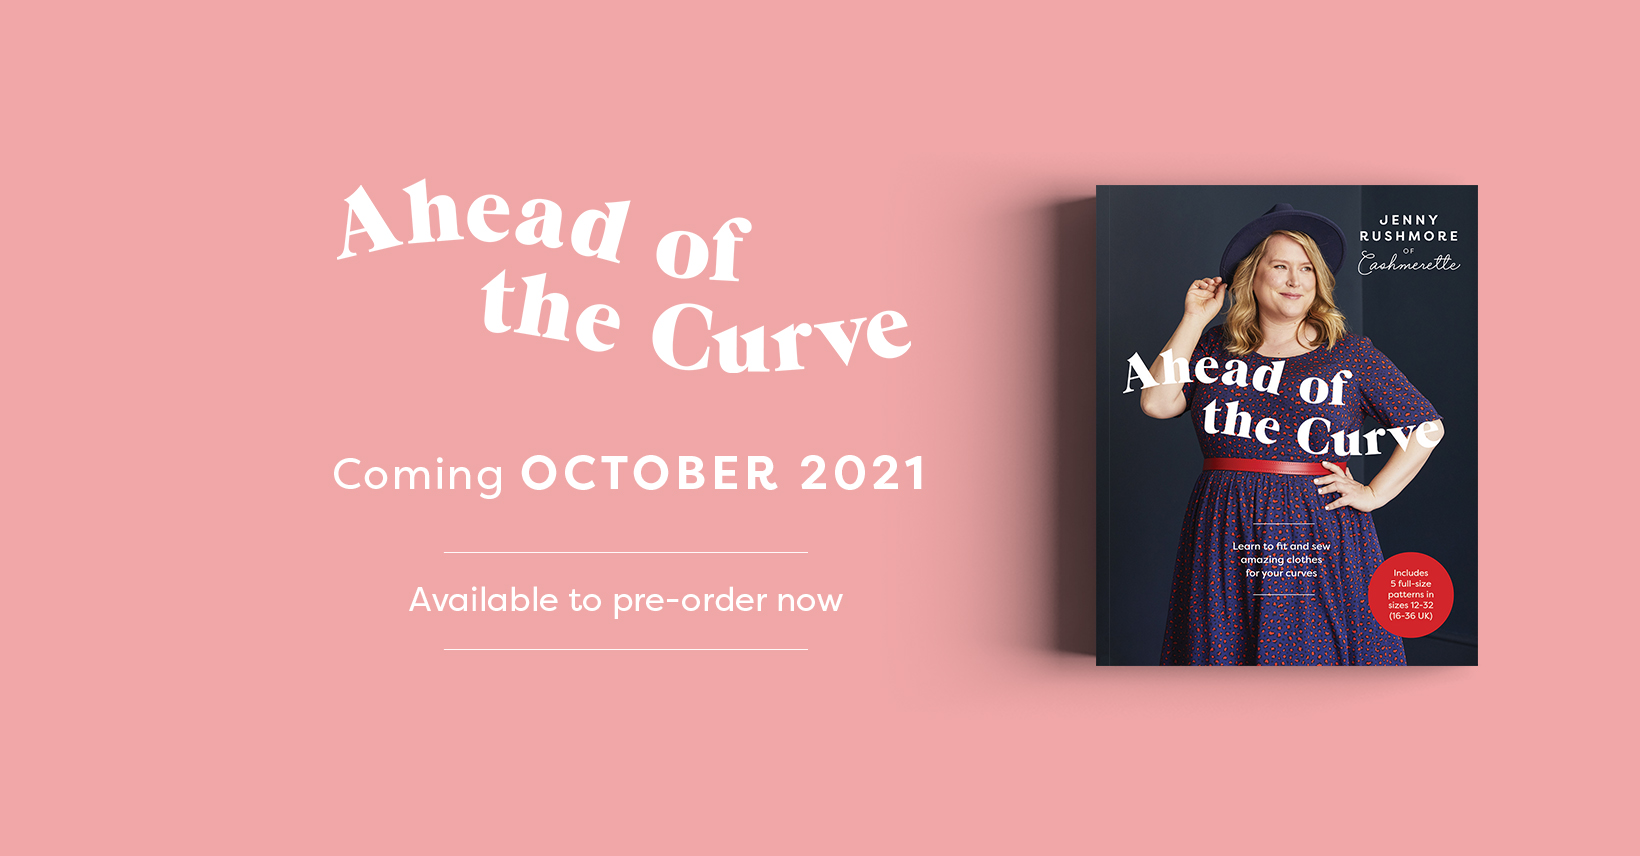 "Ahead of the Curve", a fitting book for curves by Jenny Rushmore of Cashmerette